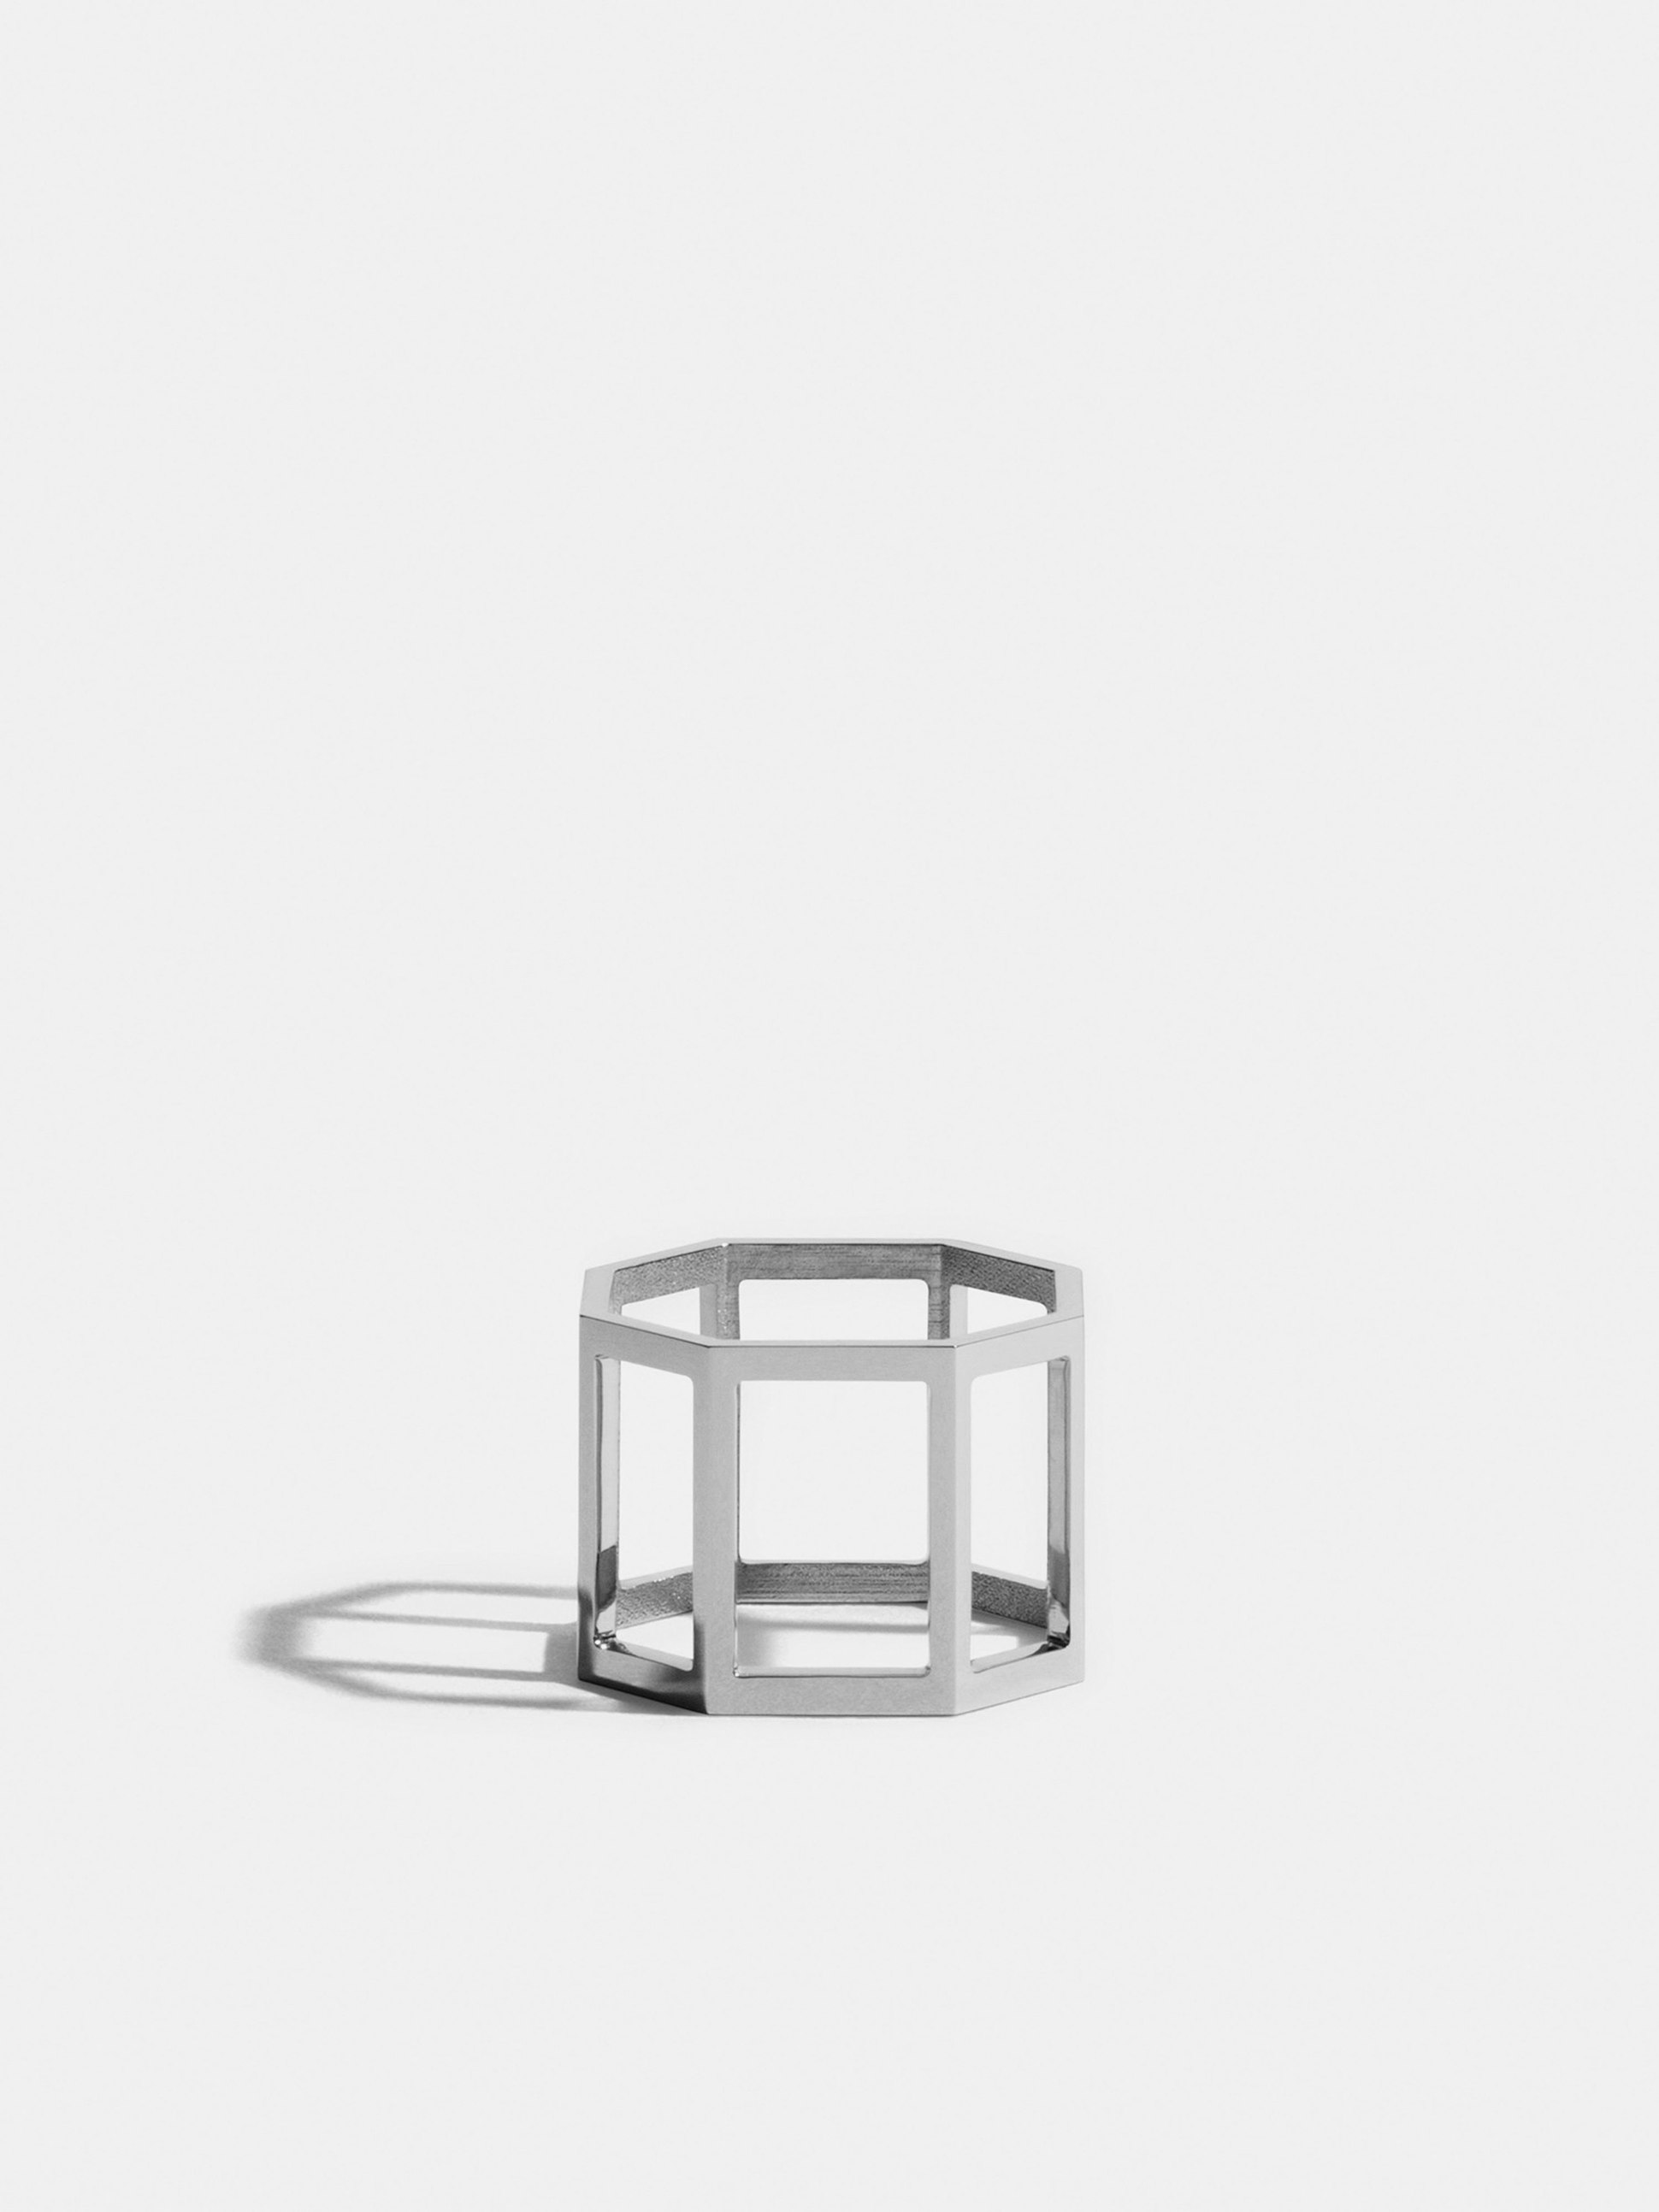 Octogone structured ring in 18k Fairmined ethical white gold (14mm)